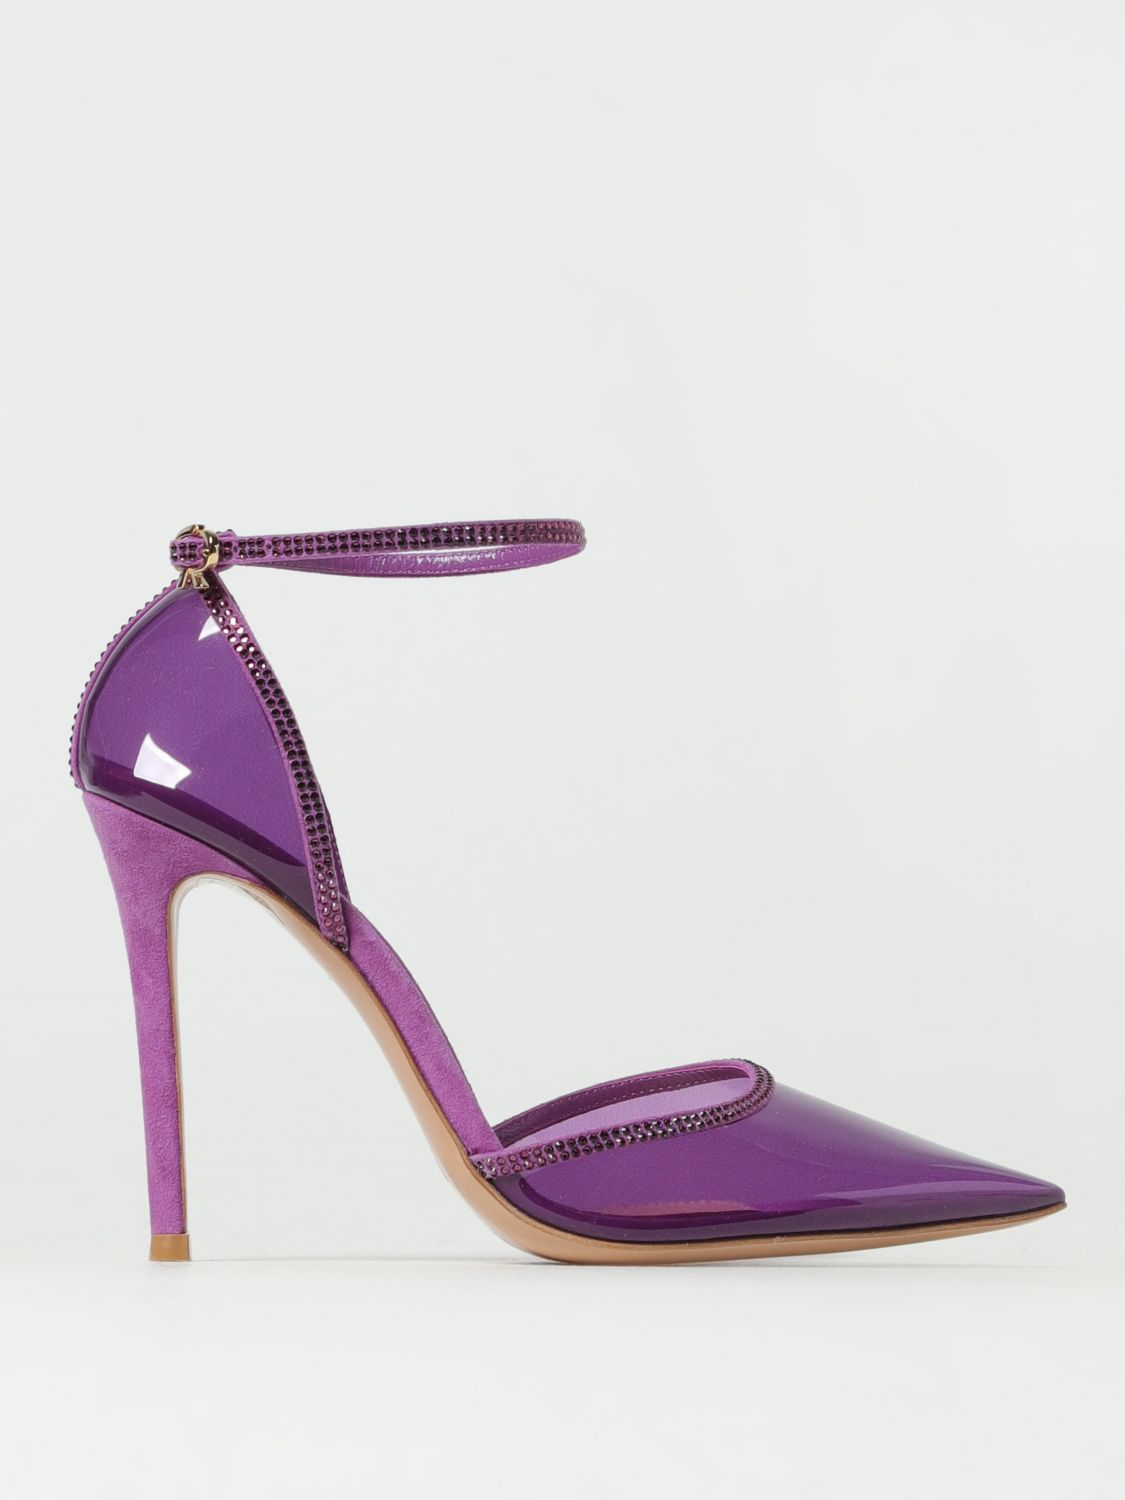 Gianvito Rossi High Heel Shoes  Woman In Violet